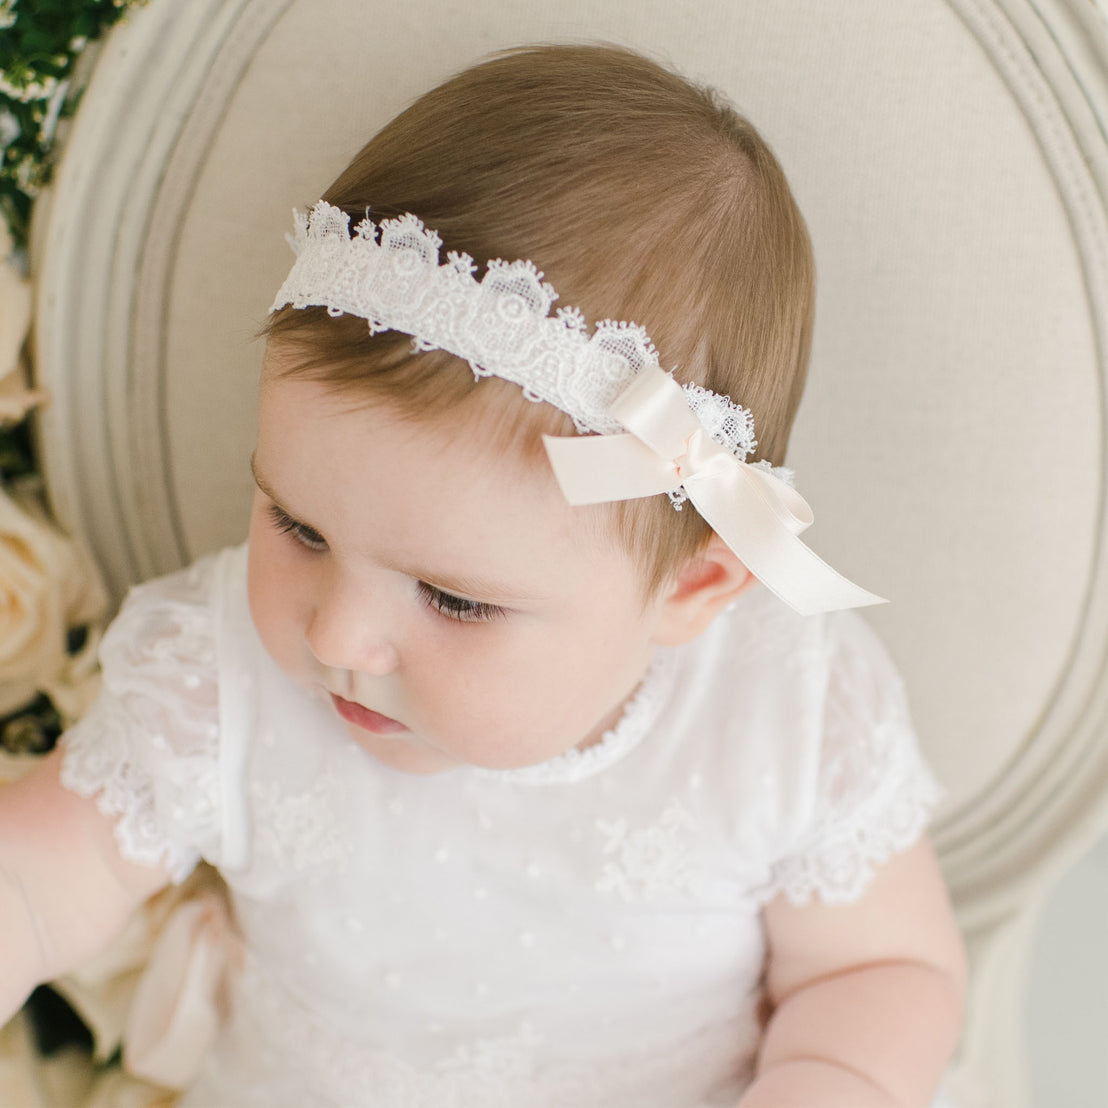 A baby with a Melissa Headband looks downward, wearing a delicate white dress with lace details, set against a soft, light background with floral accents.